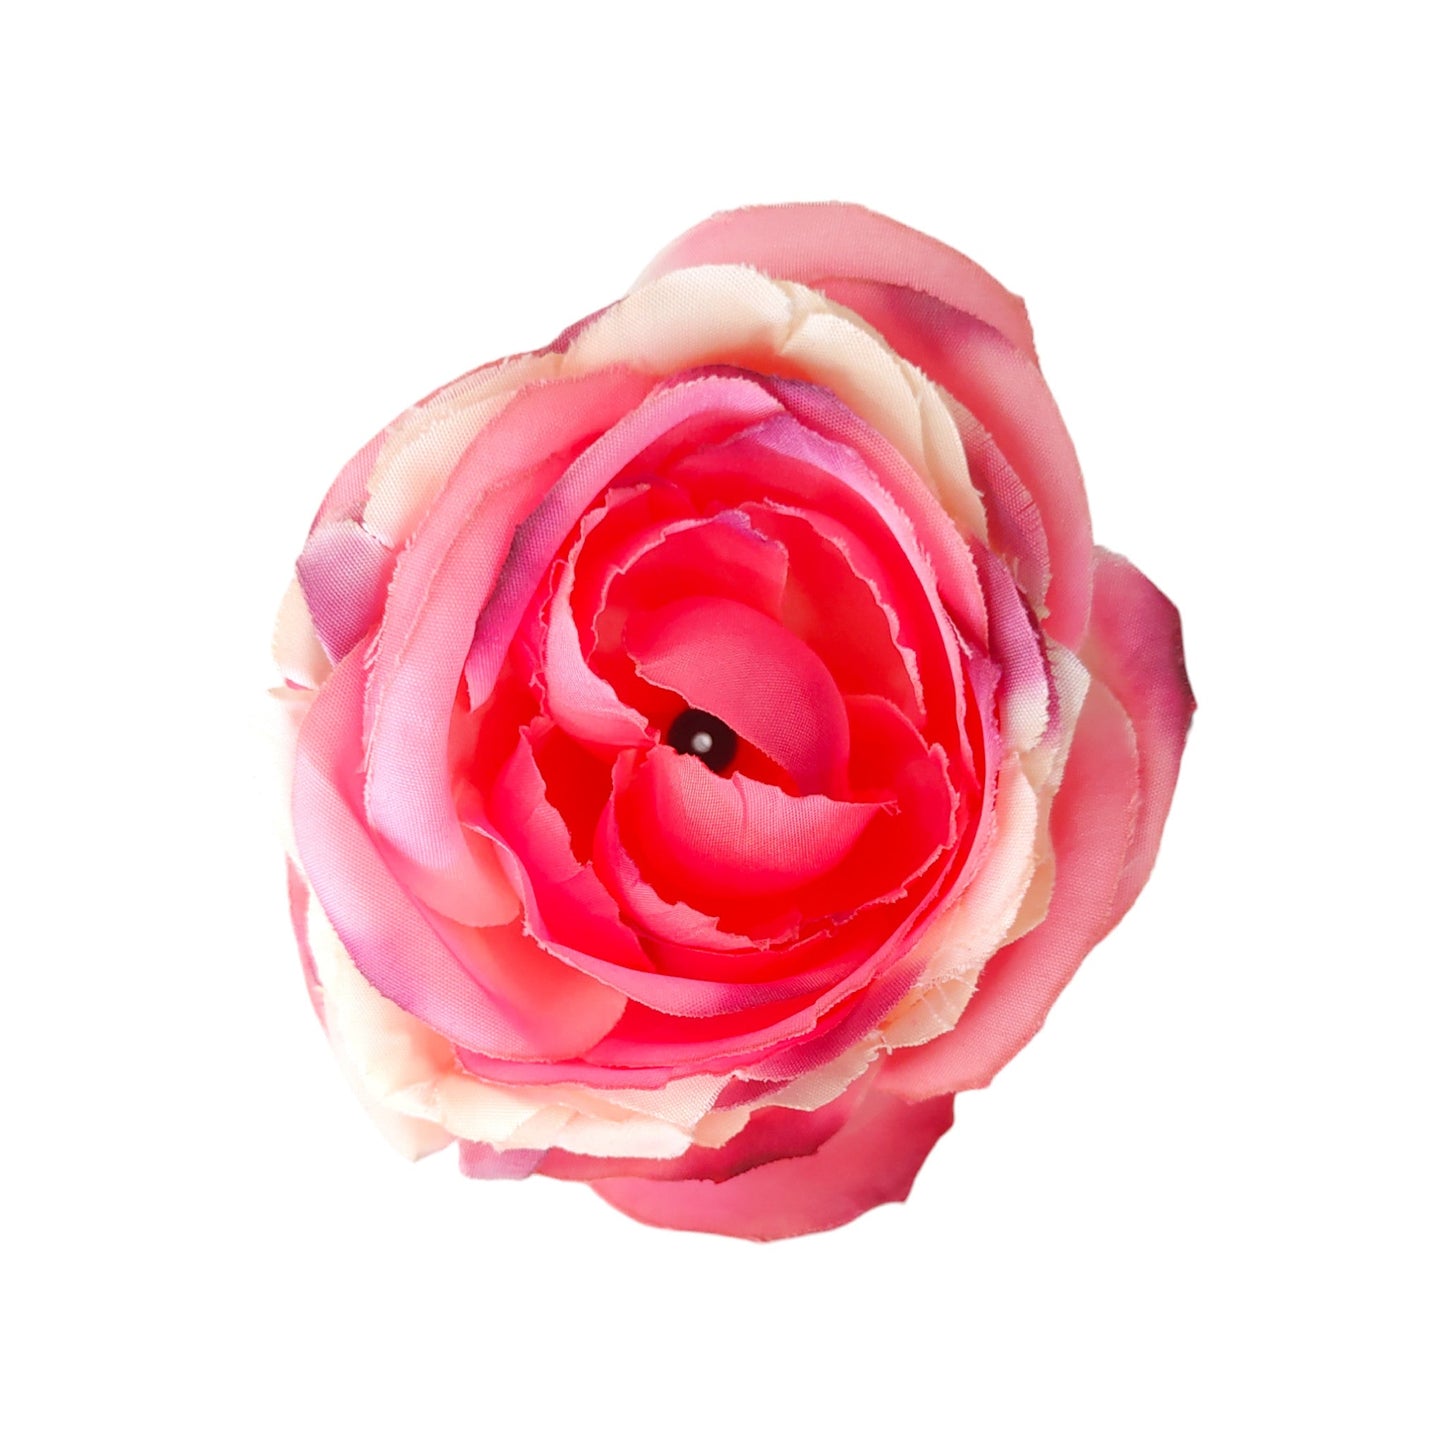 6.5 cm Big Rose Fabric Flower Head For Crafting or Decoration - 20 Pcs